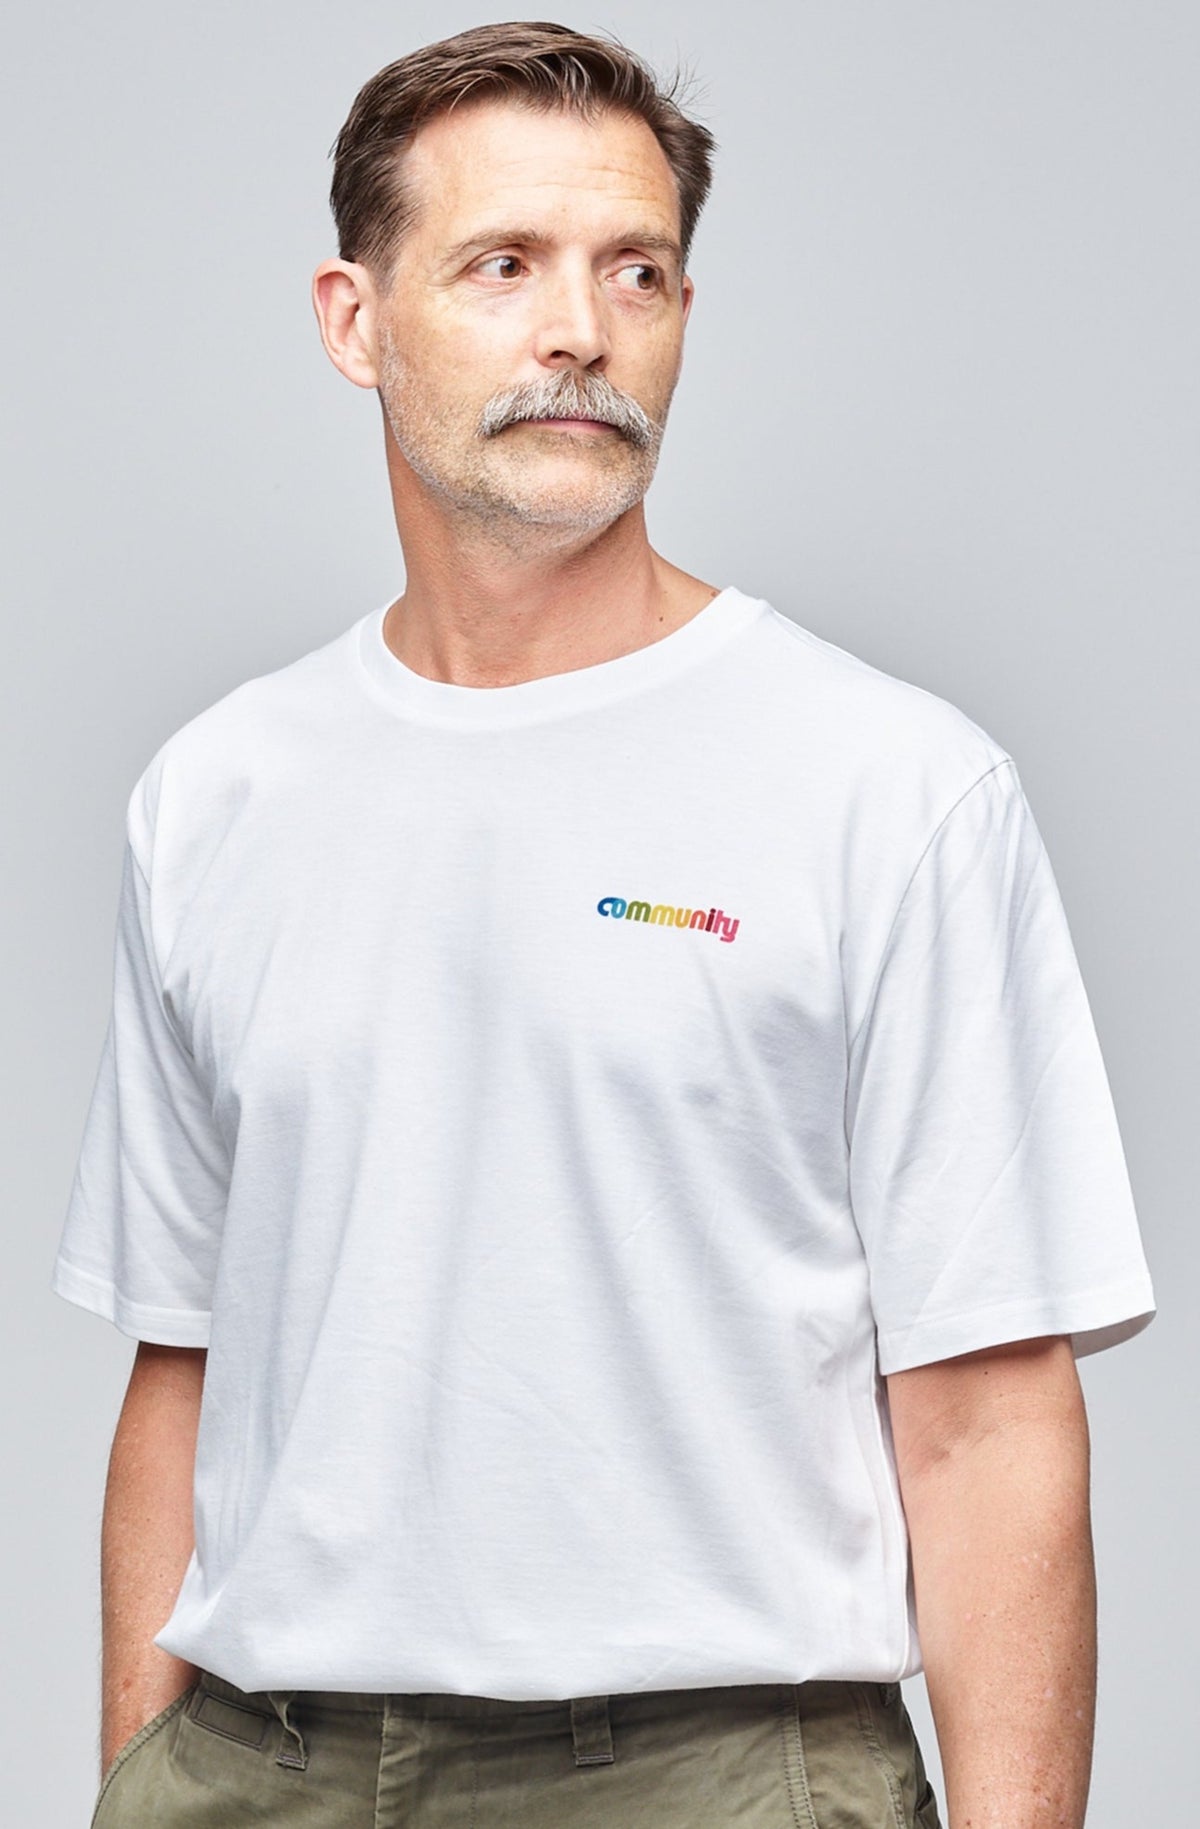 
            Community Clothing founder, Patrick Grant, wearing a white short sleeve t-shirt with branding on the chest. Styled tucked in